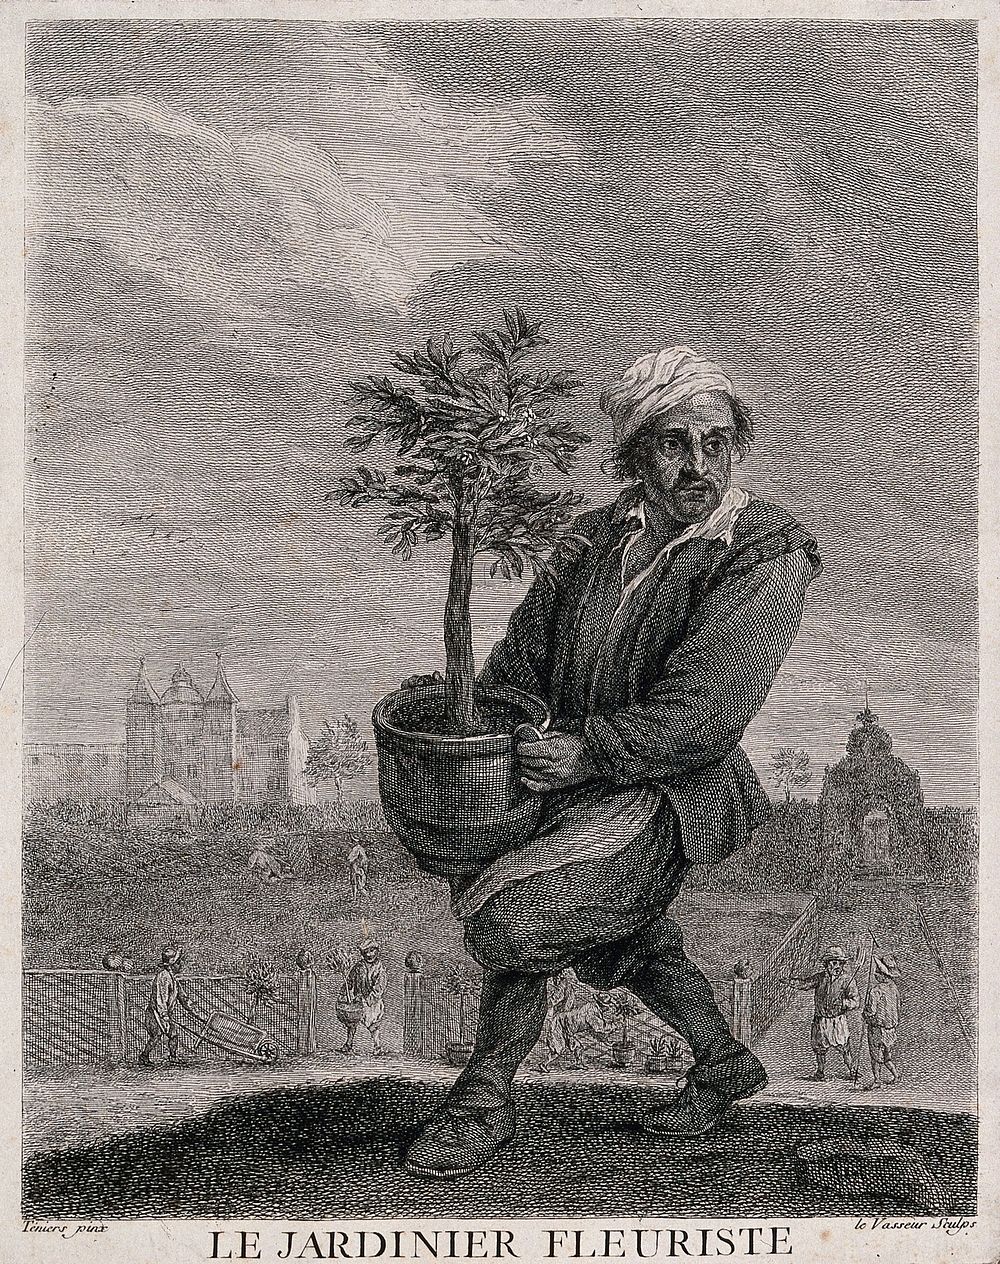 A man carries a large pot plant while, in the background, gardeners are at work. Etching by J.C. Le Vasseur, 18th century…